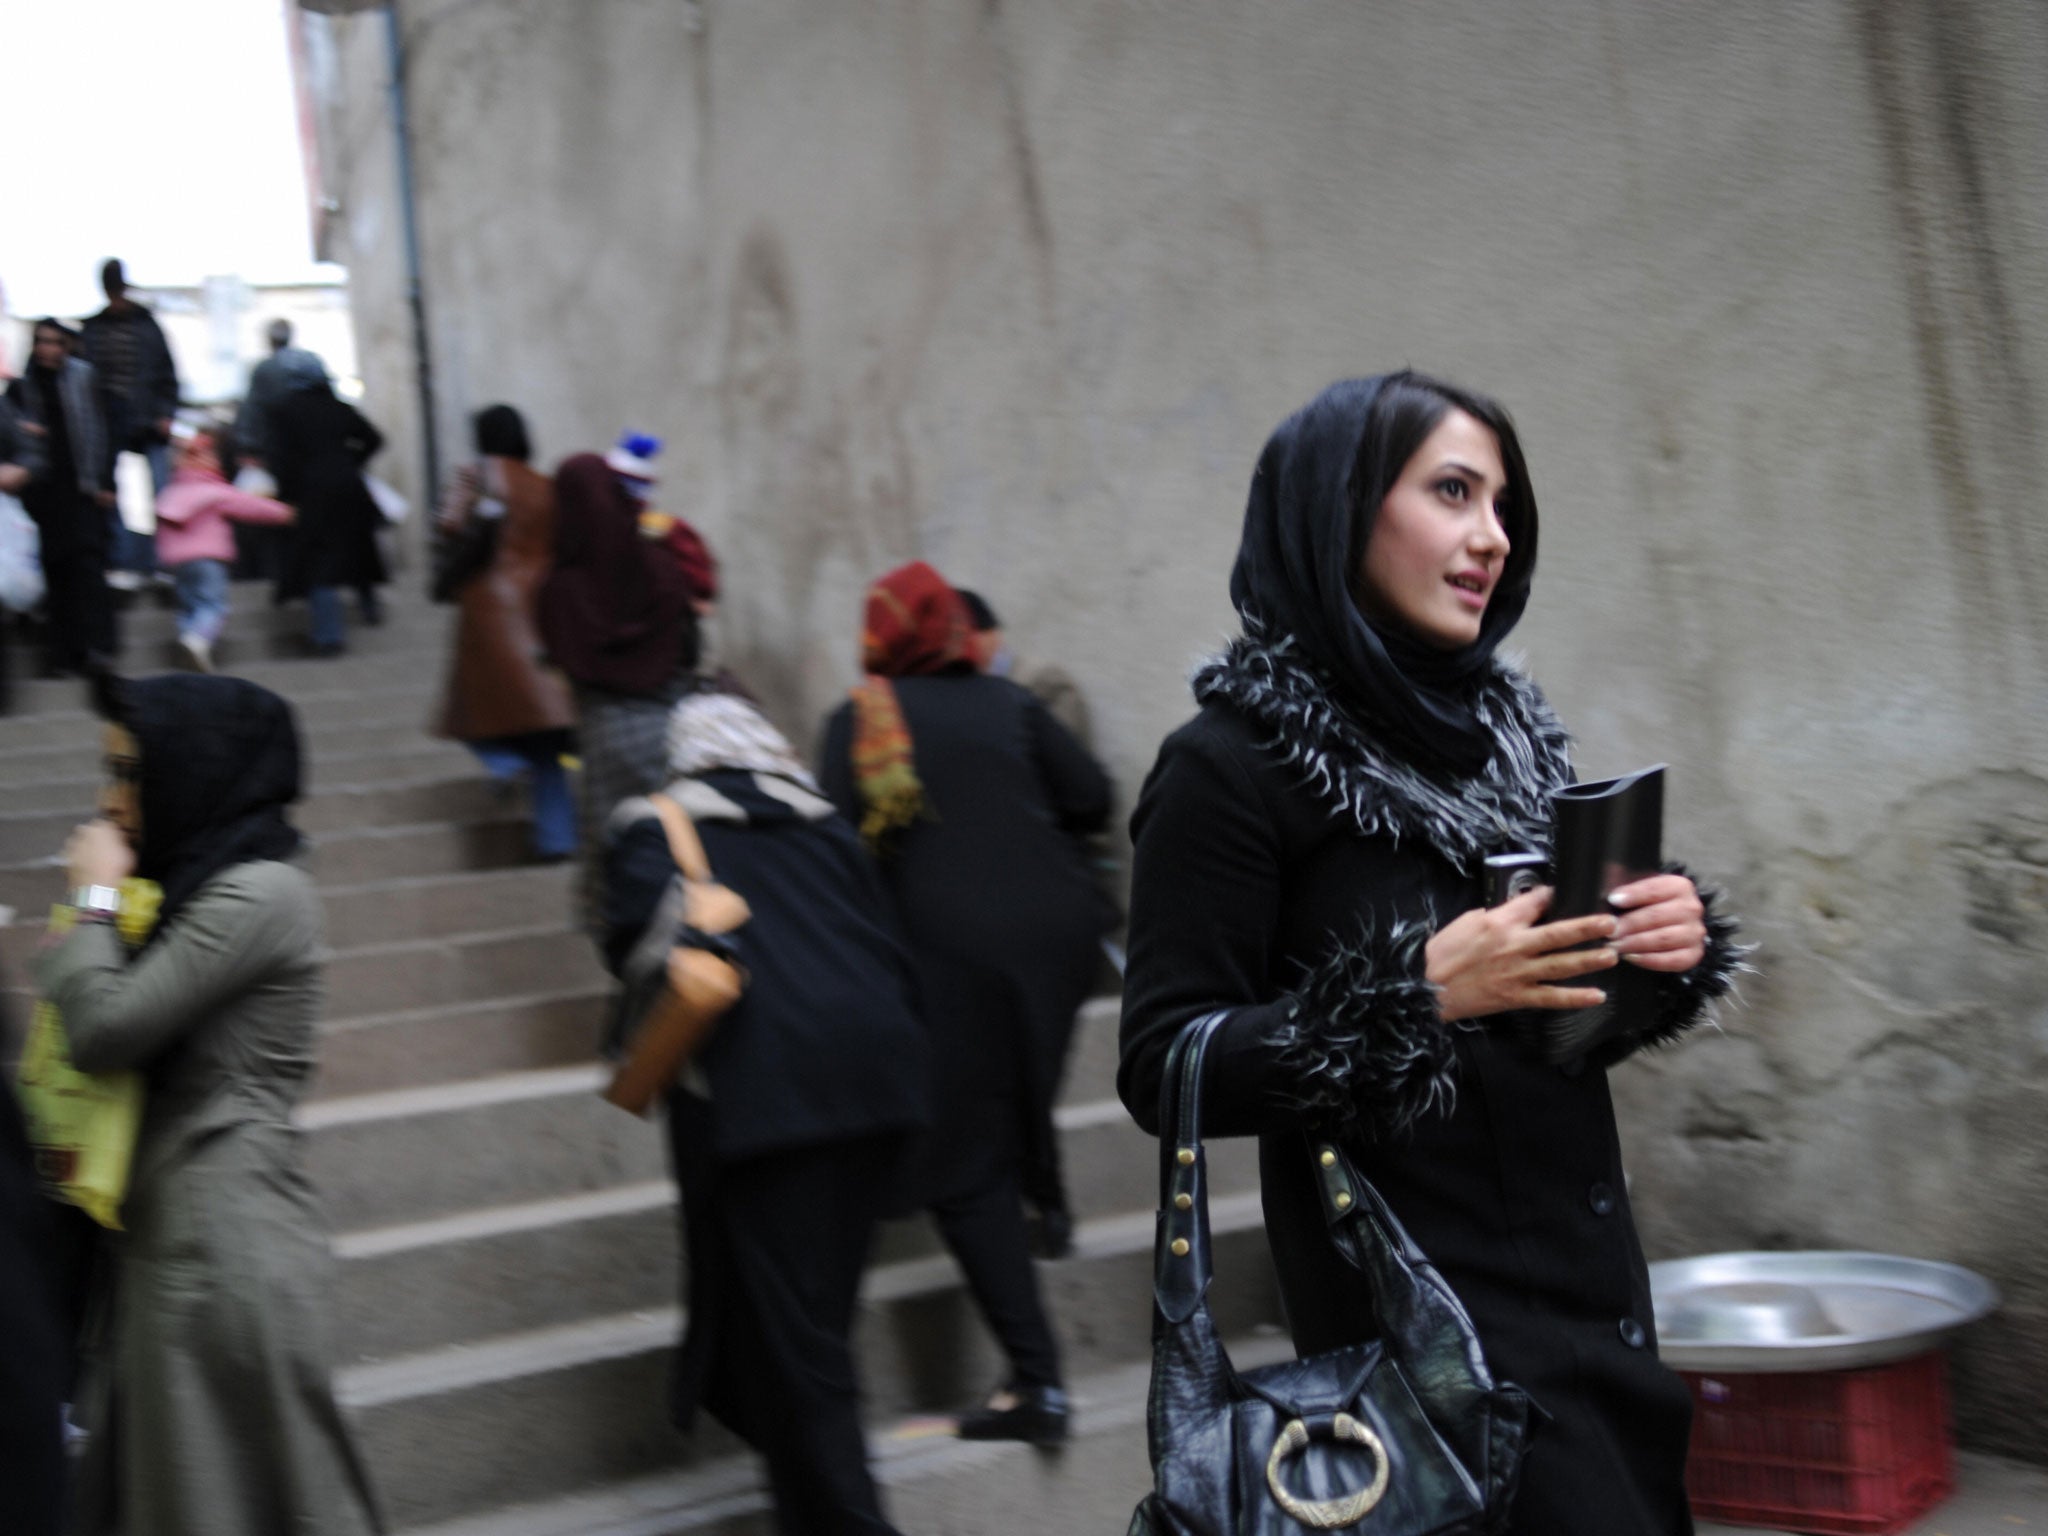 In today's relaxed Tehran, headscarves are being worn back from the face 